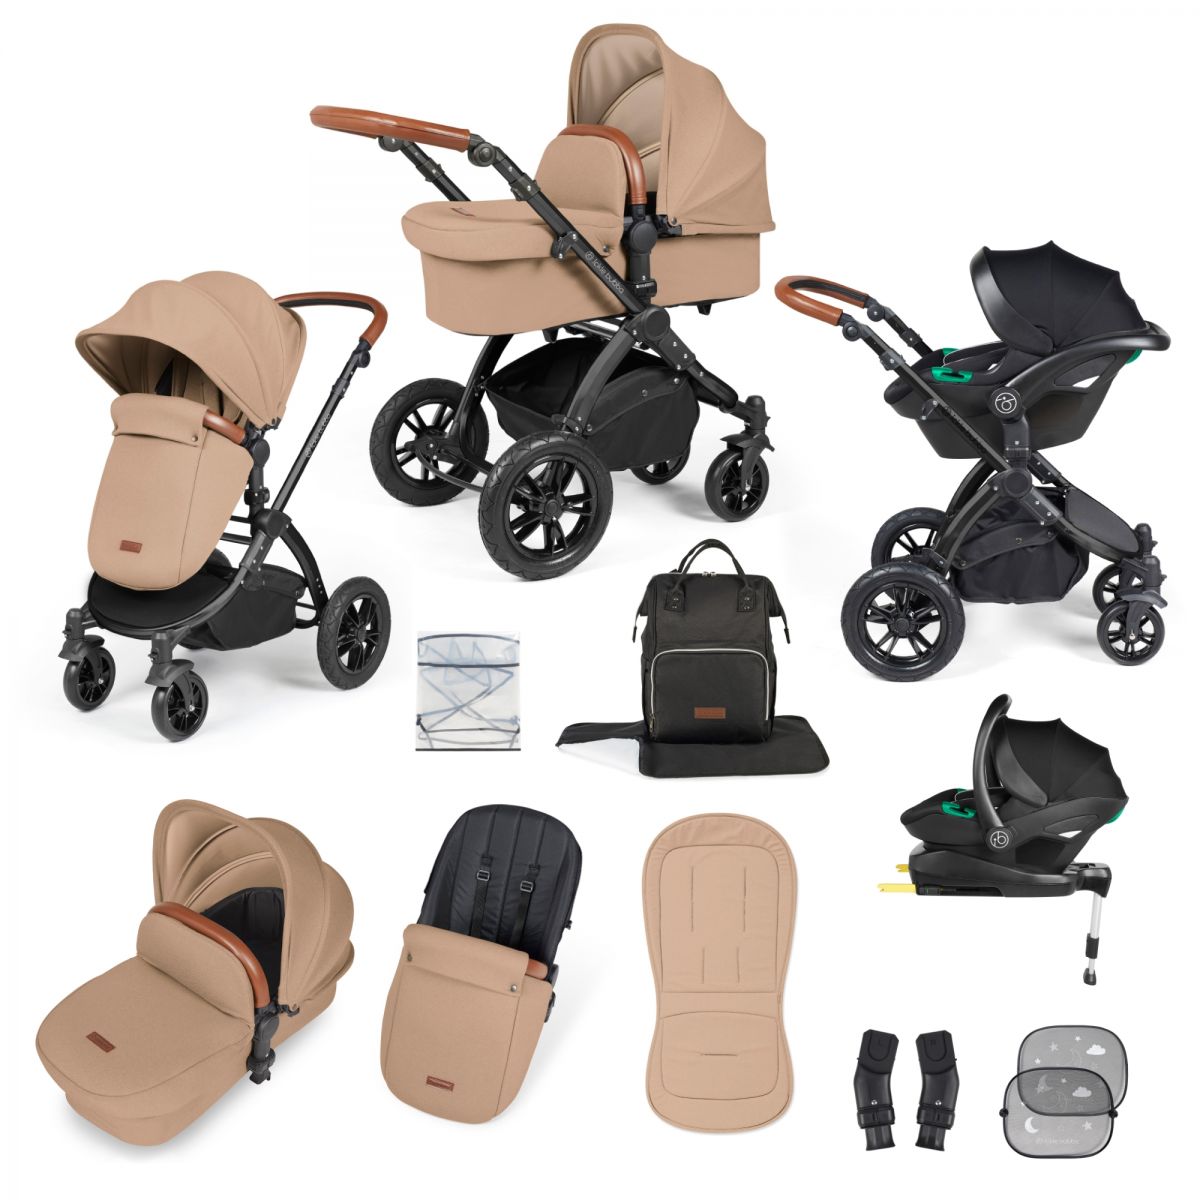 Ickle Bubba Stomp Luxe Black Frame Travel System With Stratus i-Size Carseat & Isofix Base